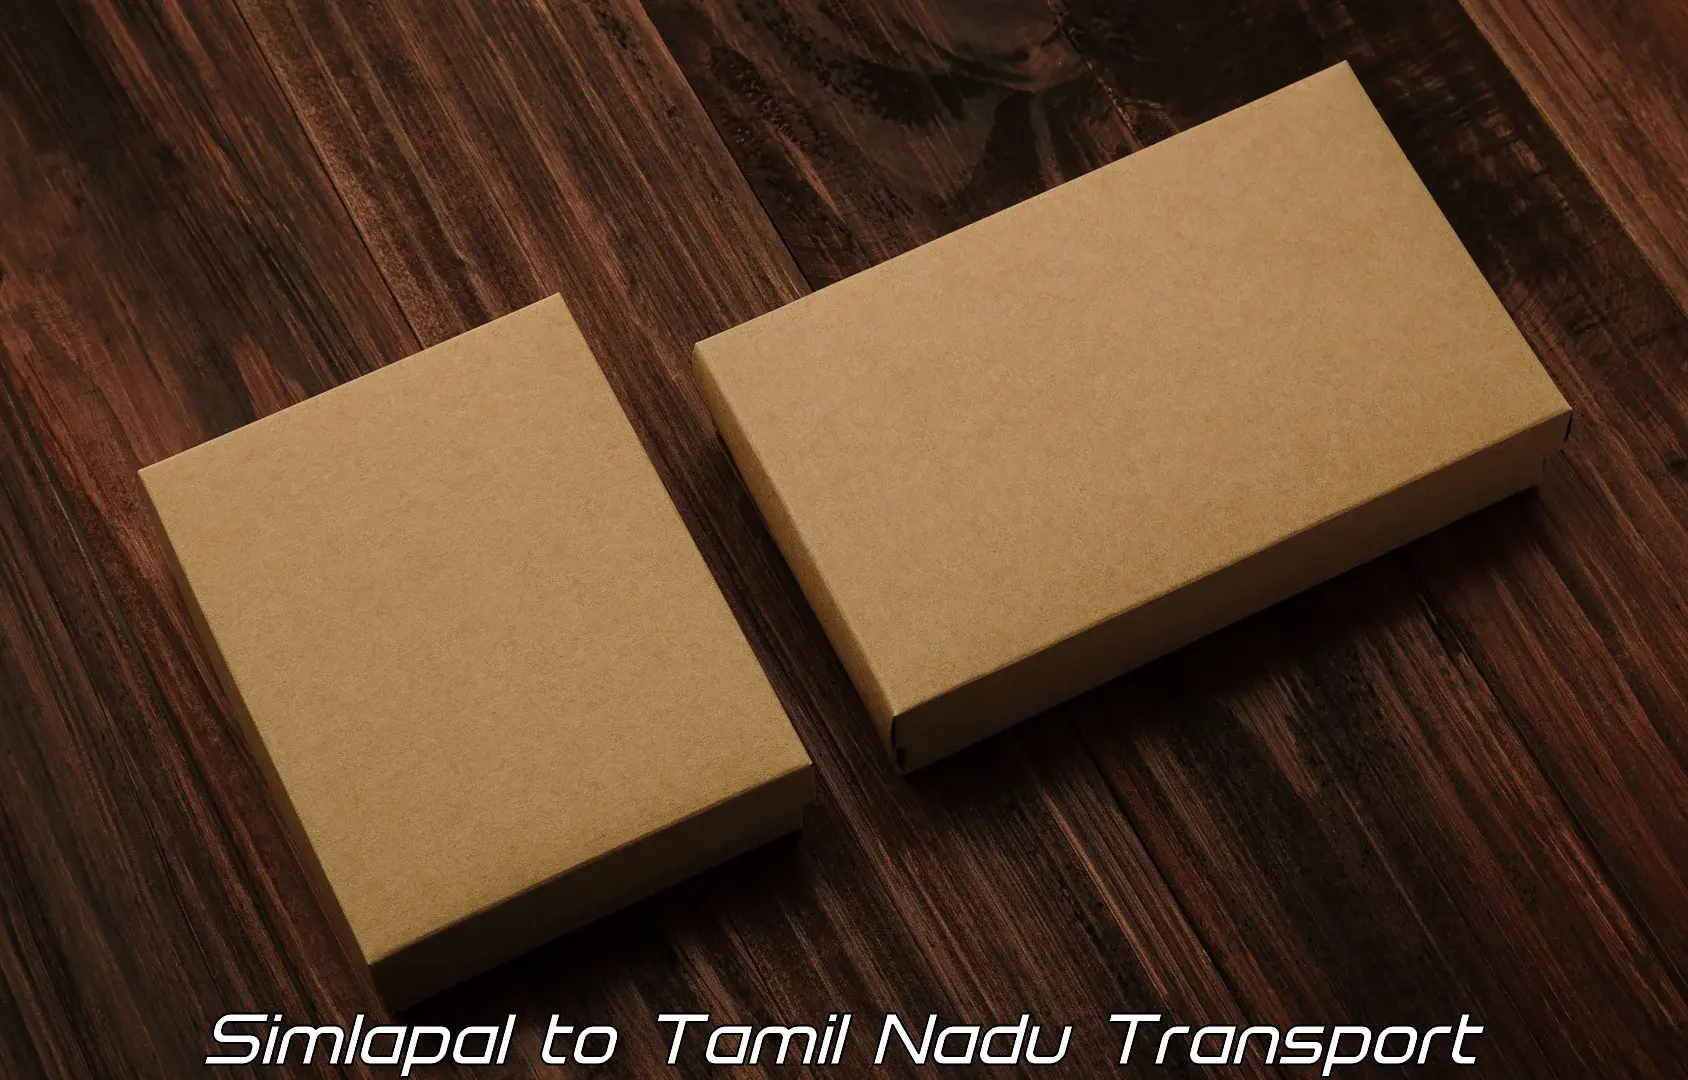 Transport bike from one state to another Simlapal to Kanyakumari